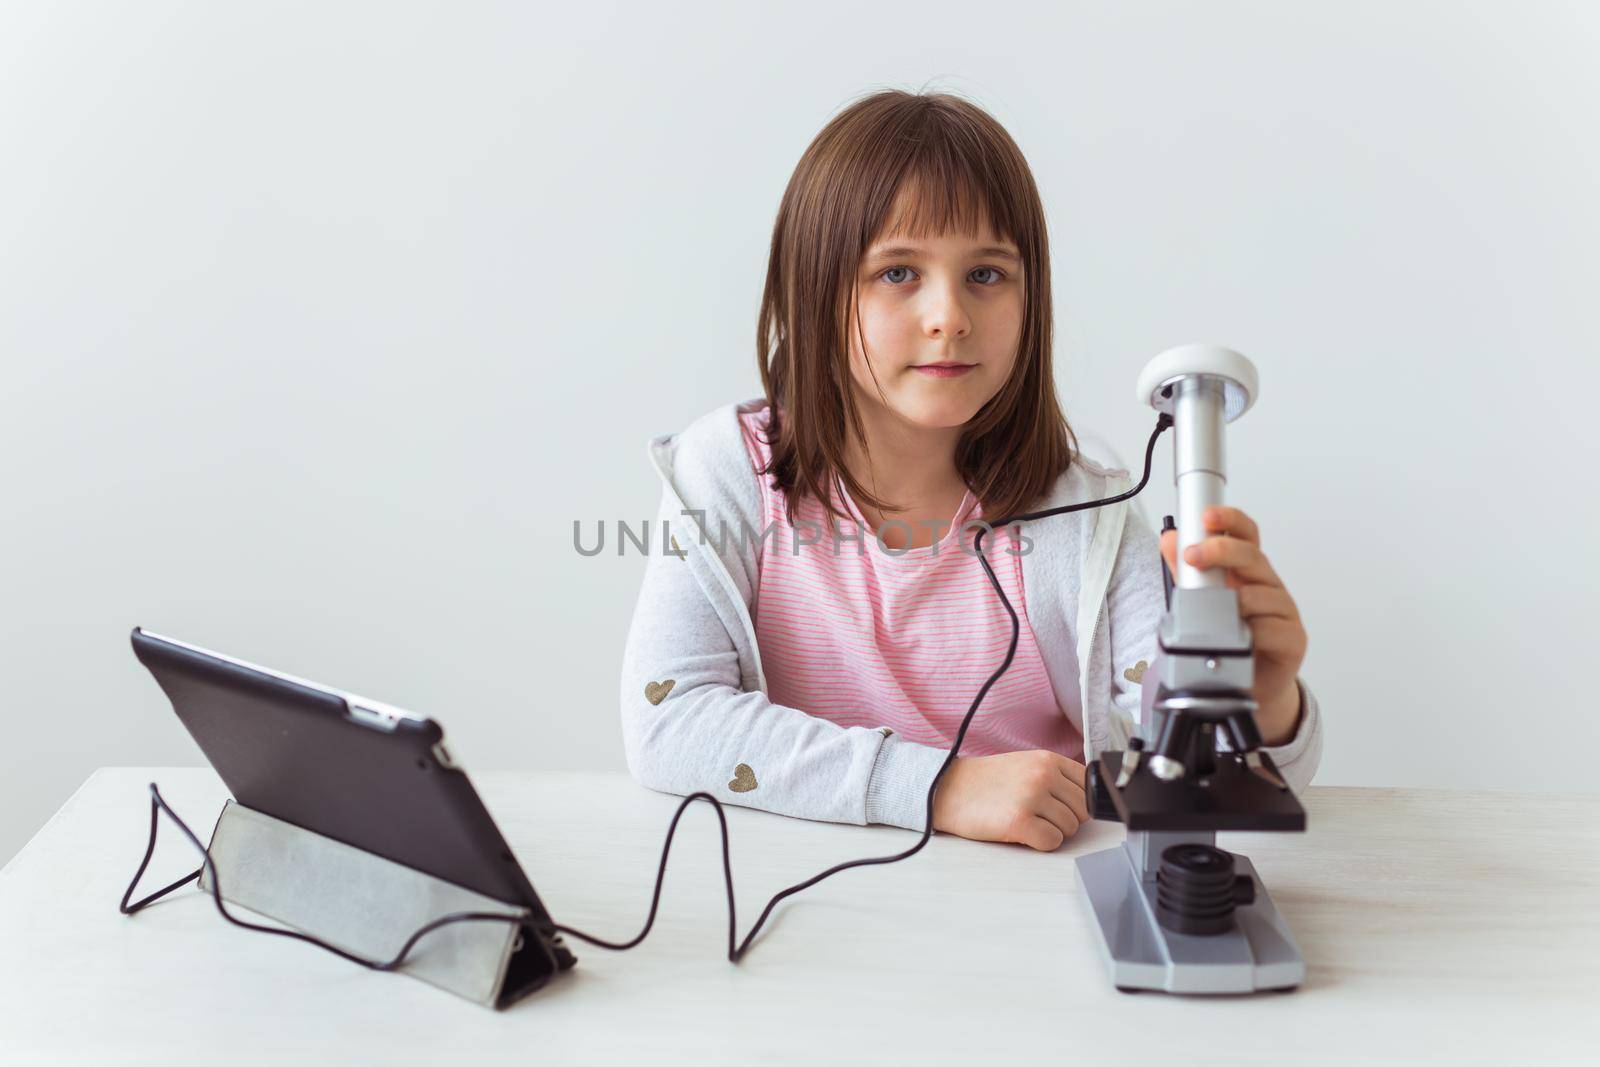 Schoolgirl using microscope in science class. Technologies, lessons and children concept. by Satura86